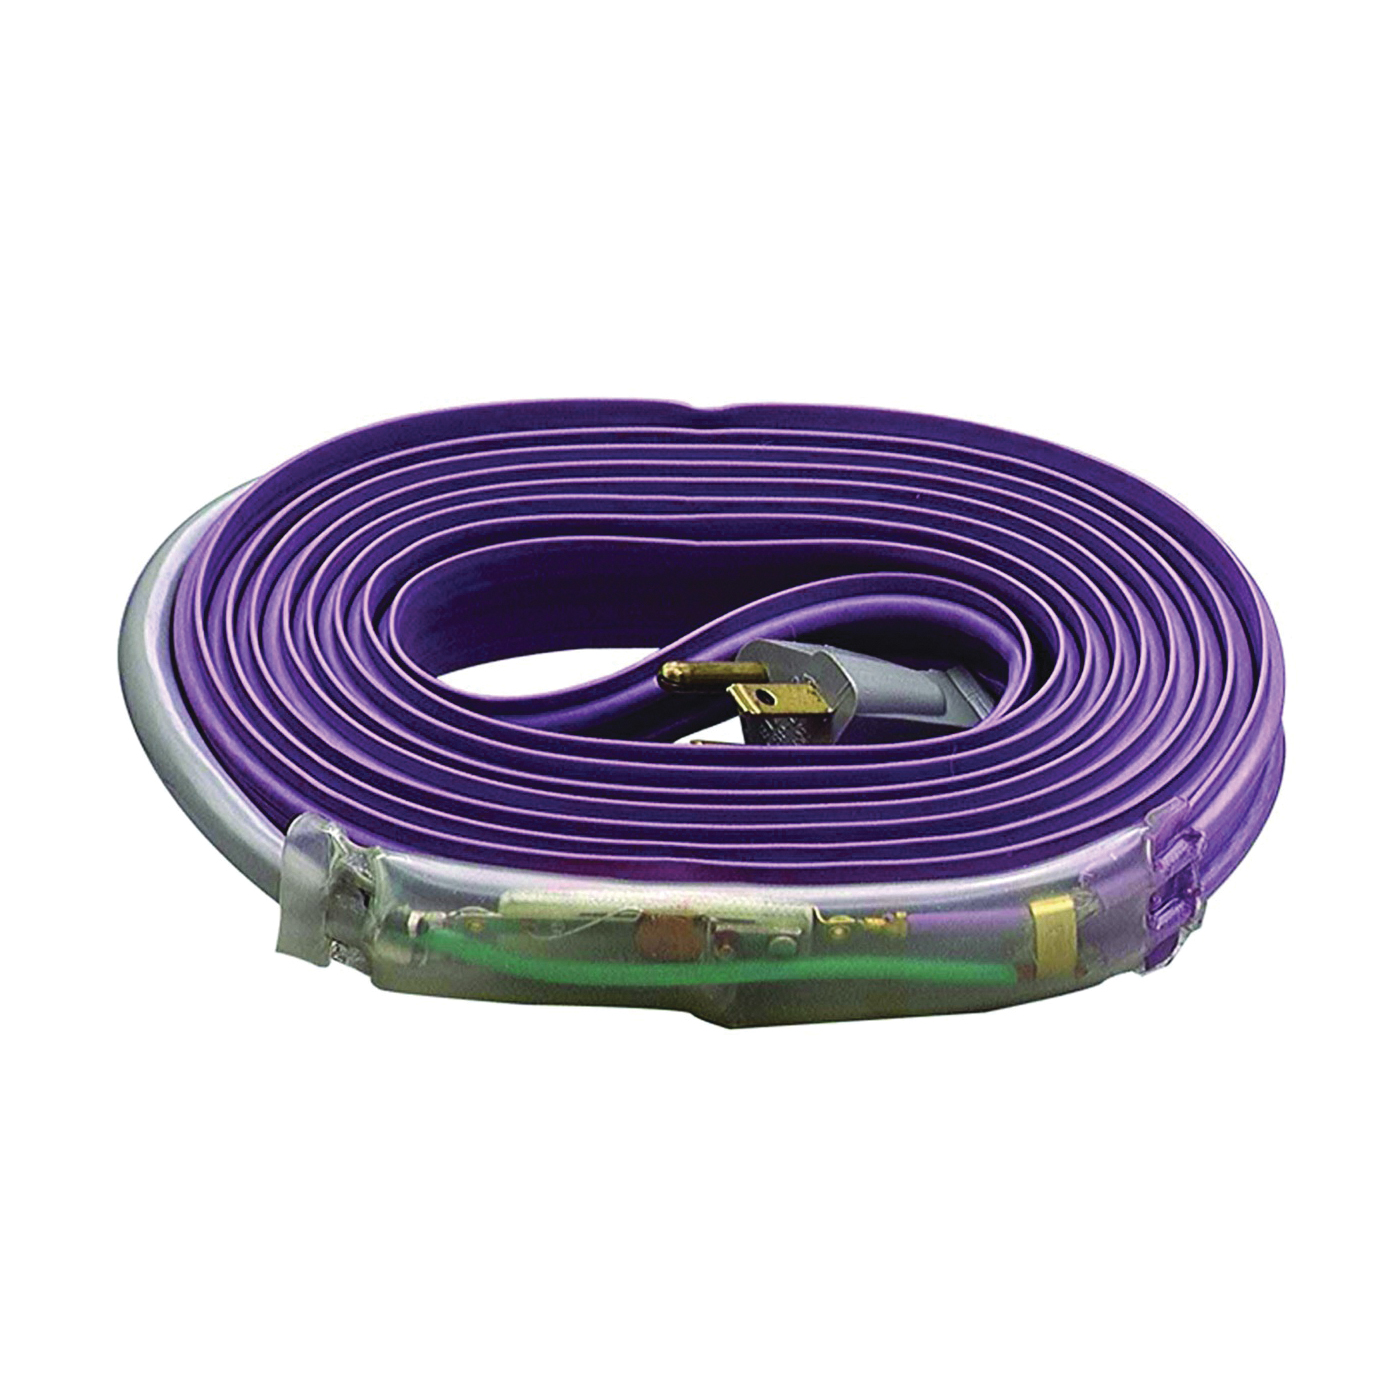 EasyHeat AHB-013A Pipe Heating Cable, 120 VAC, 3 ft L